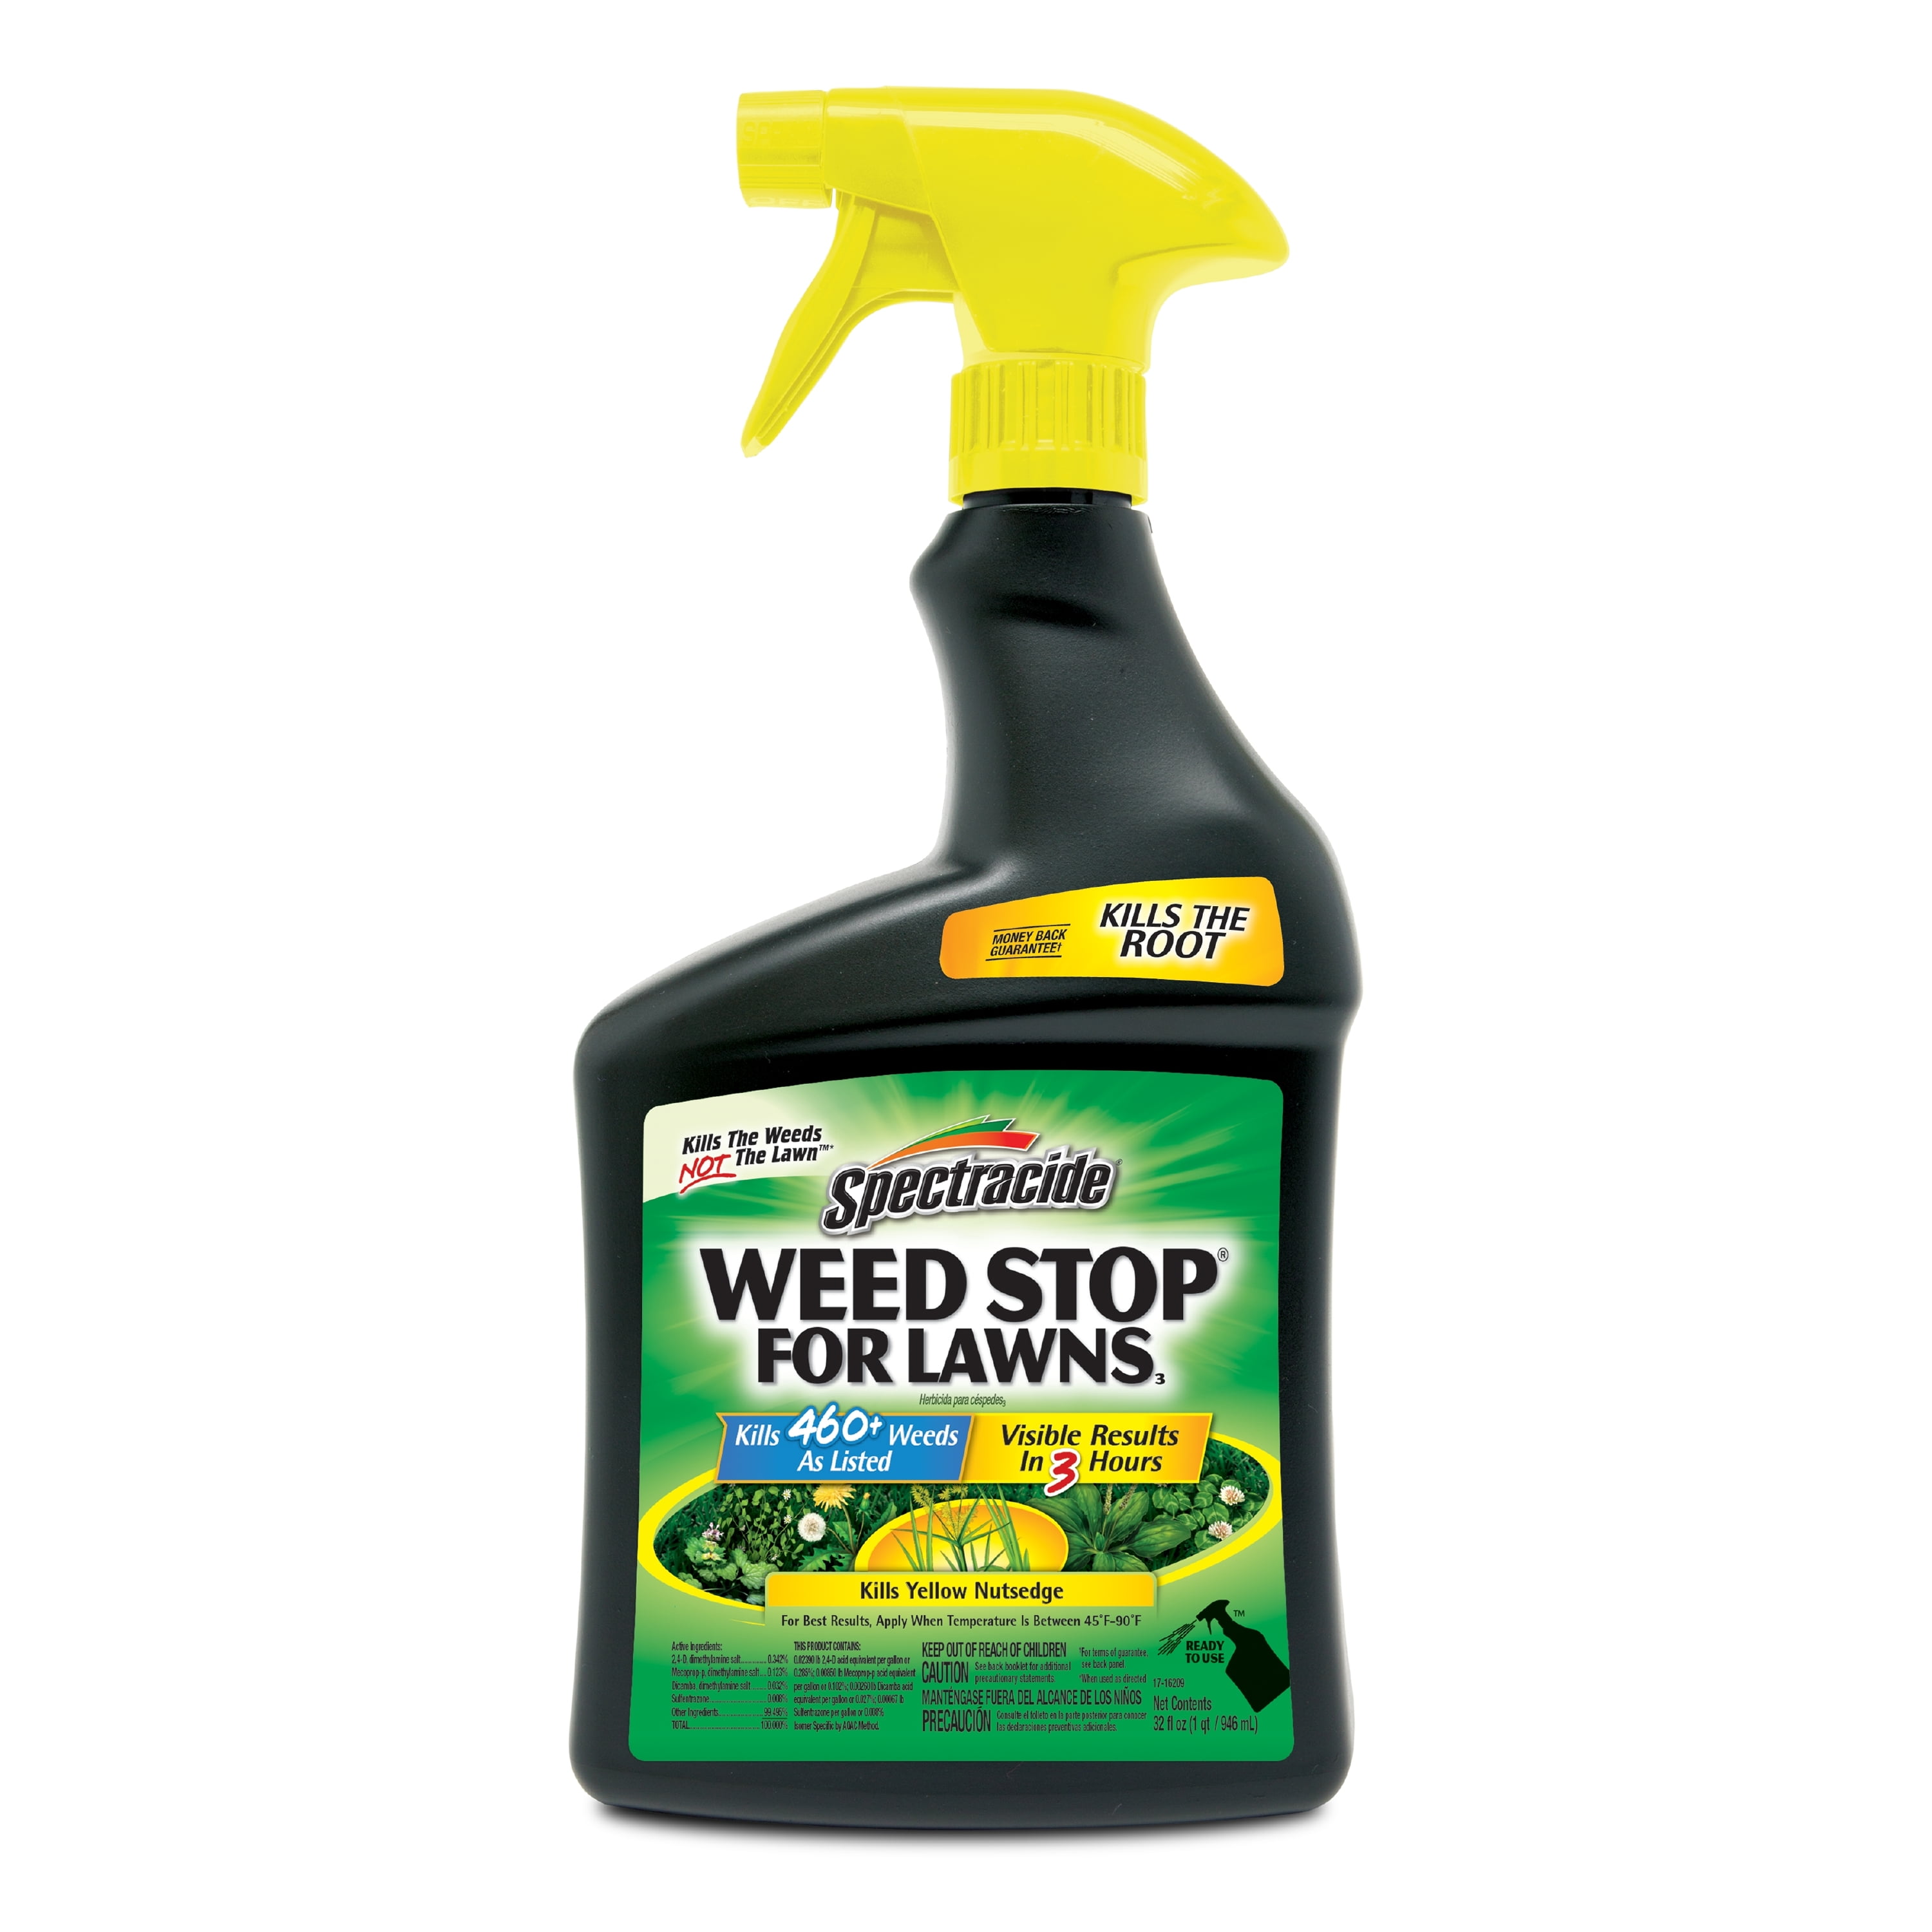 Spectracide Ready-to-Use Weed Stop for Lawns, 32 Fl. Oz